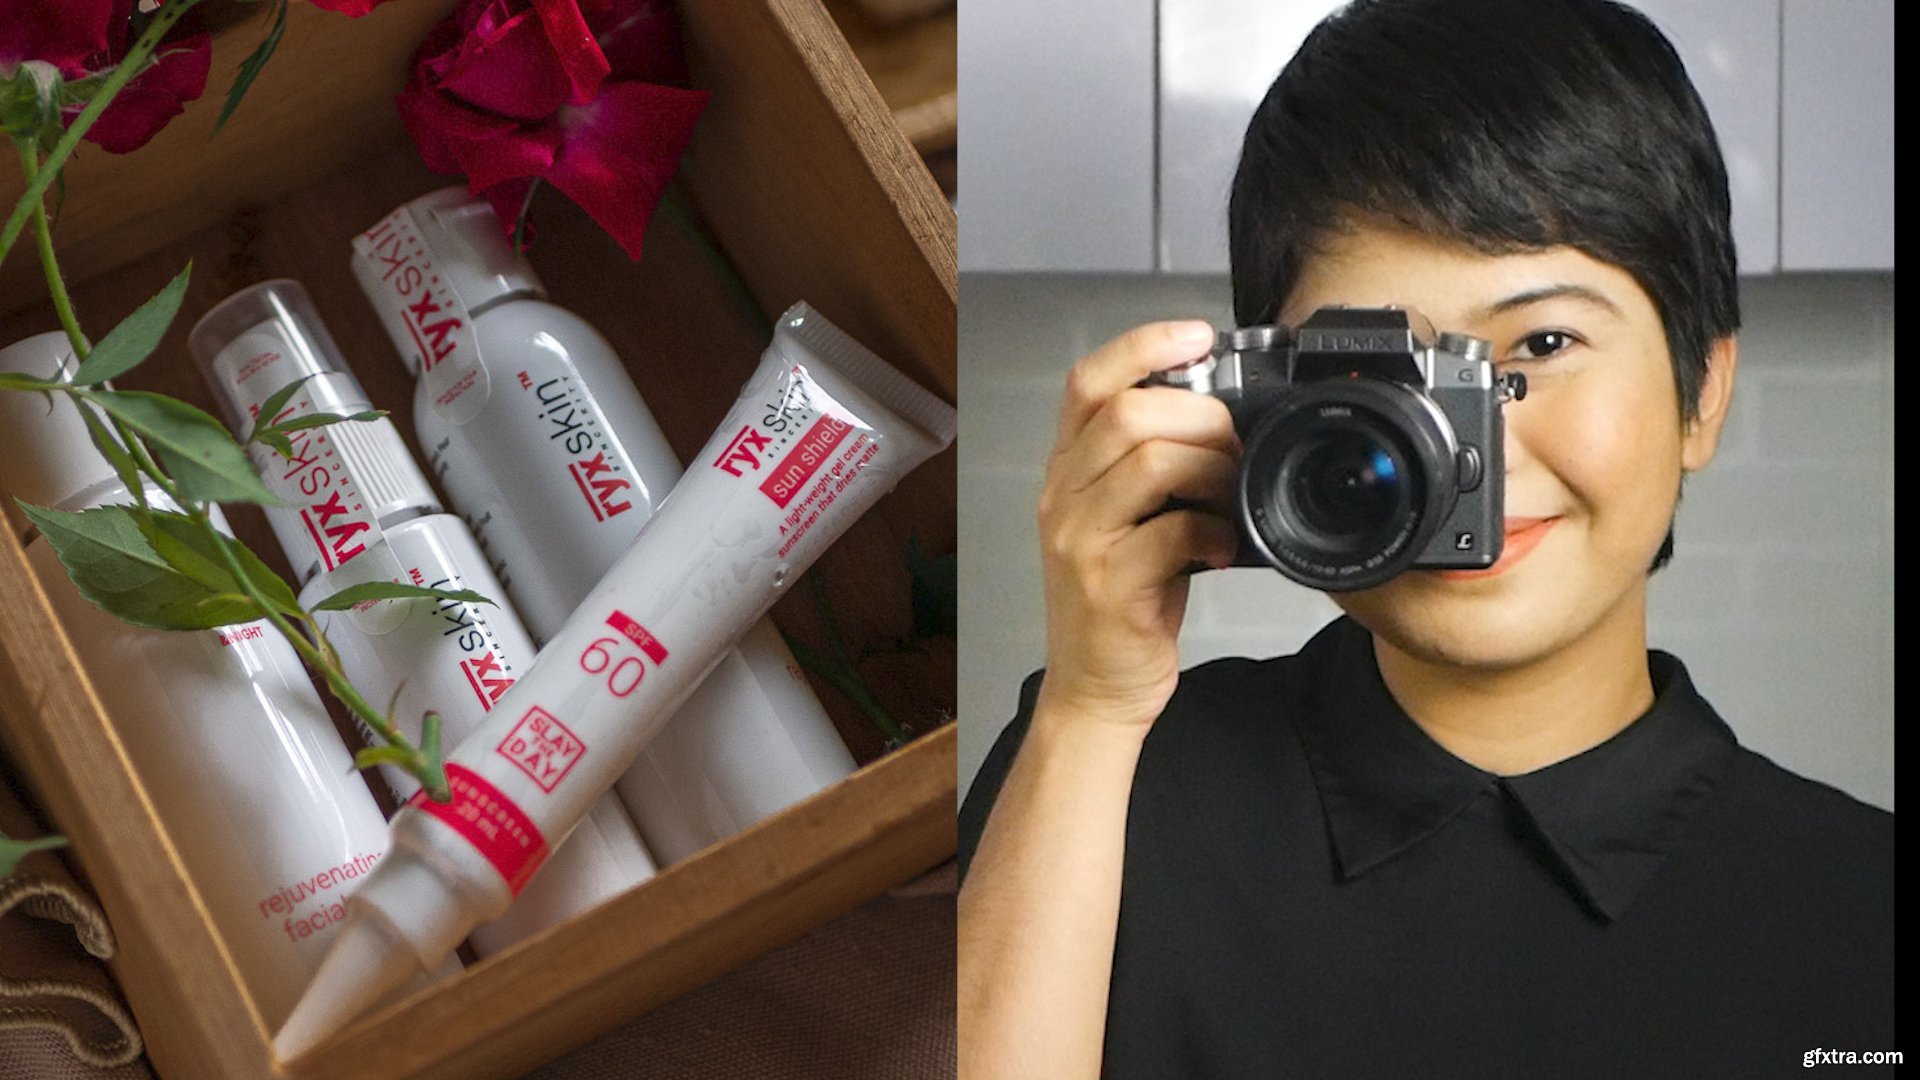 DIY Product Photography - Shoot great product photos at home Â» GFxtra